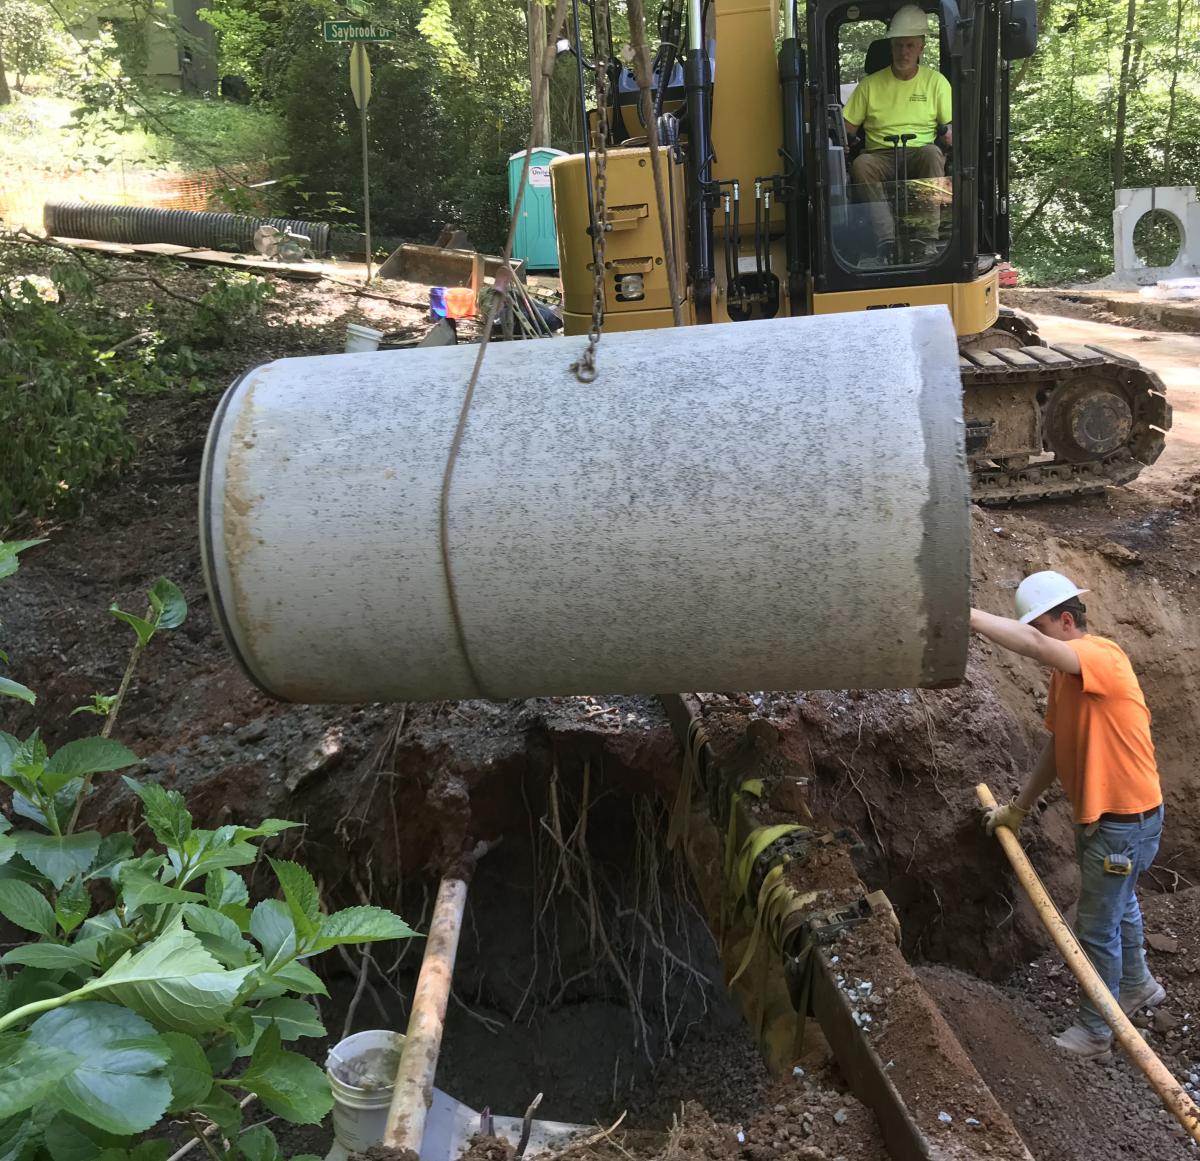 Crews complete an overhaul of stormwater infrastructure at Inman Drive and Saybrook Drive in March 2020